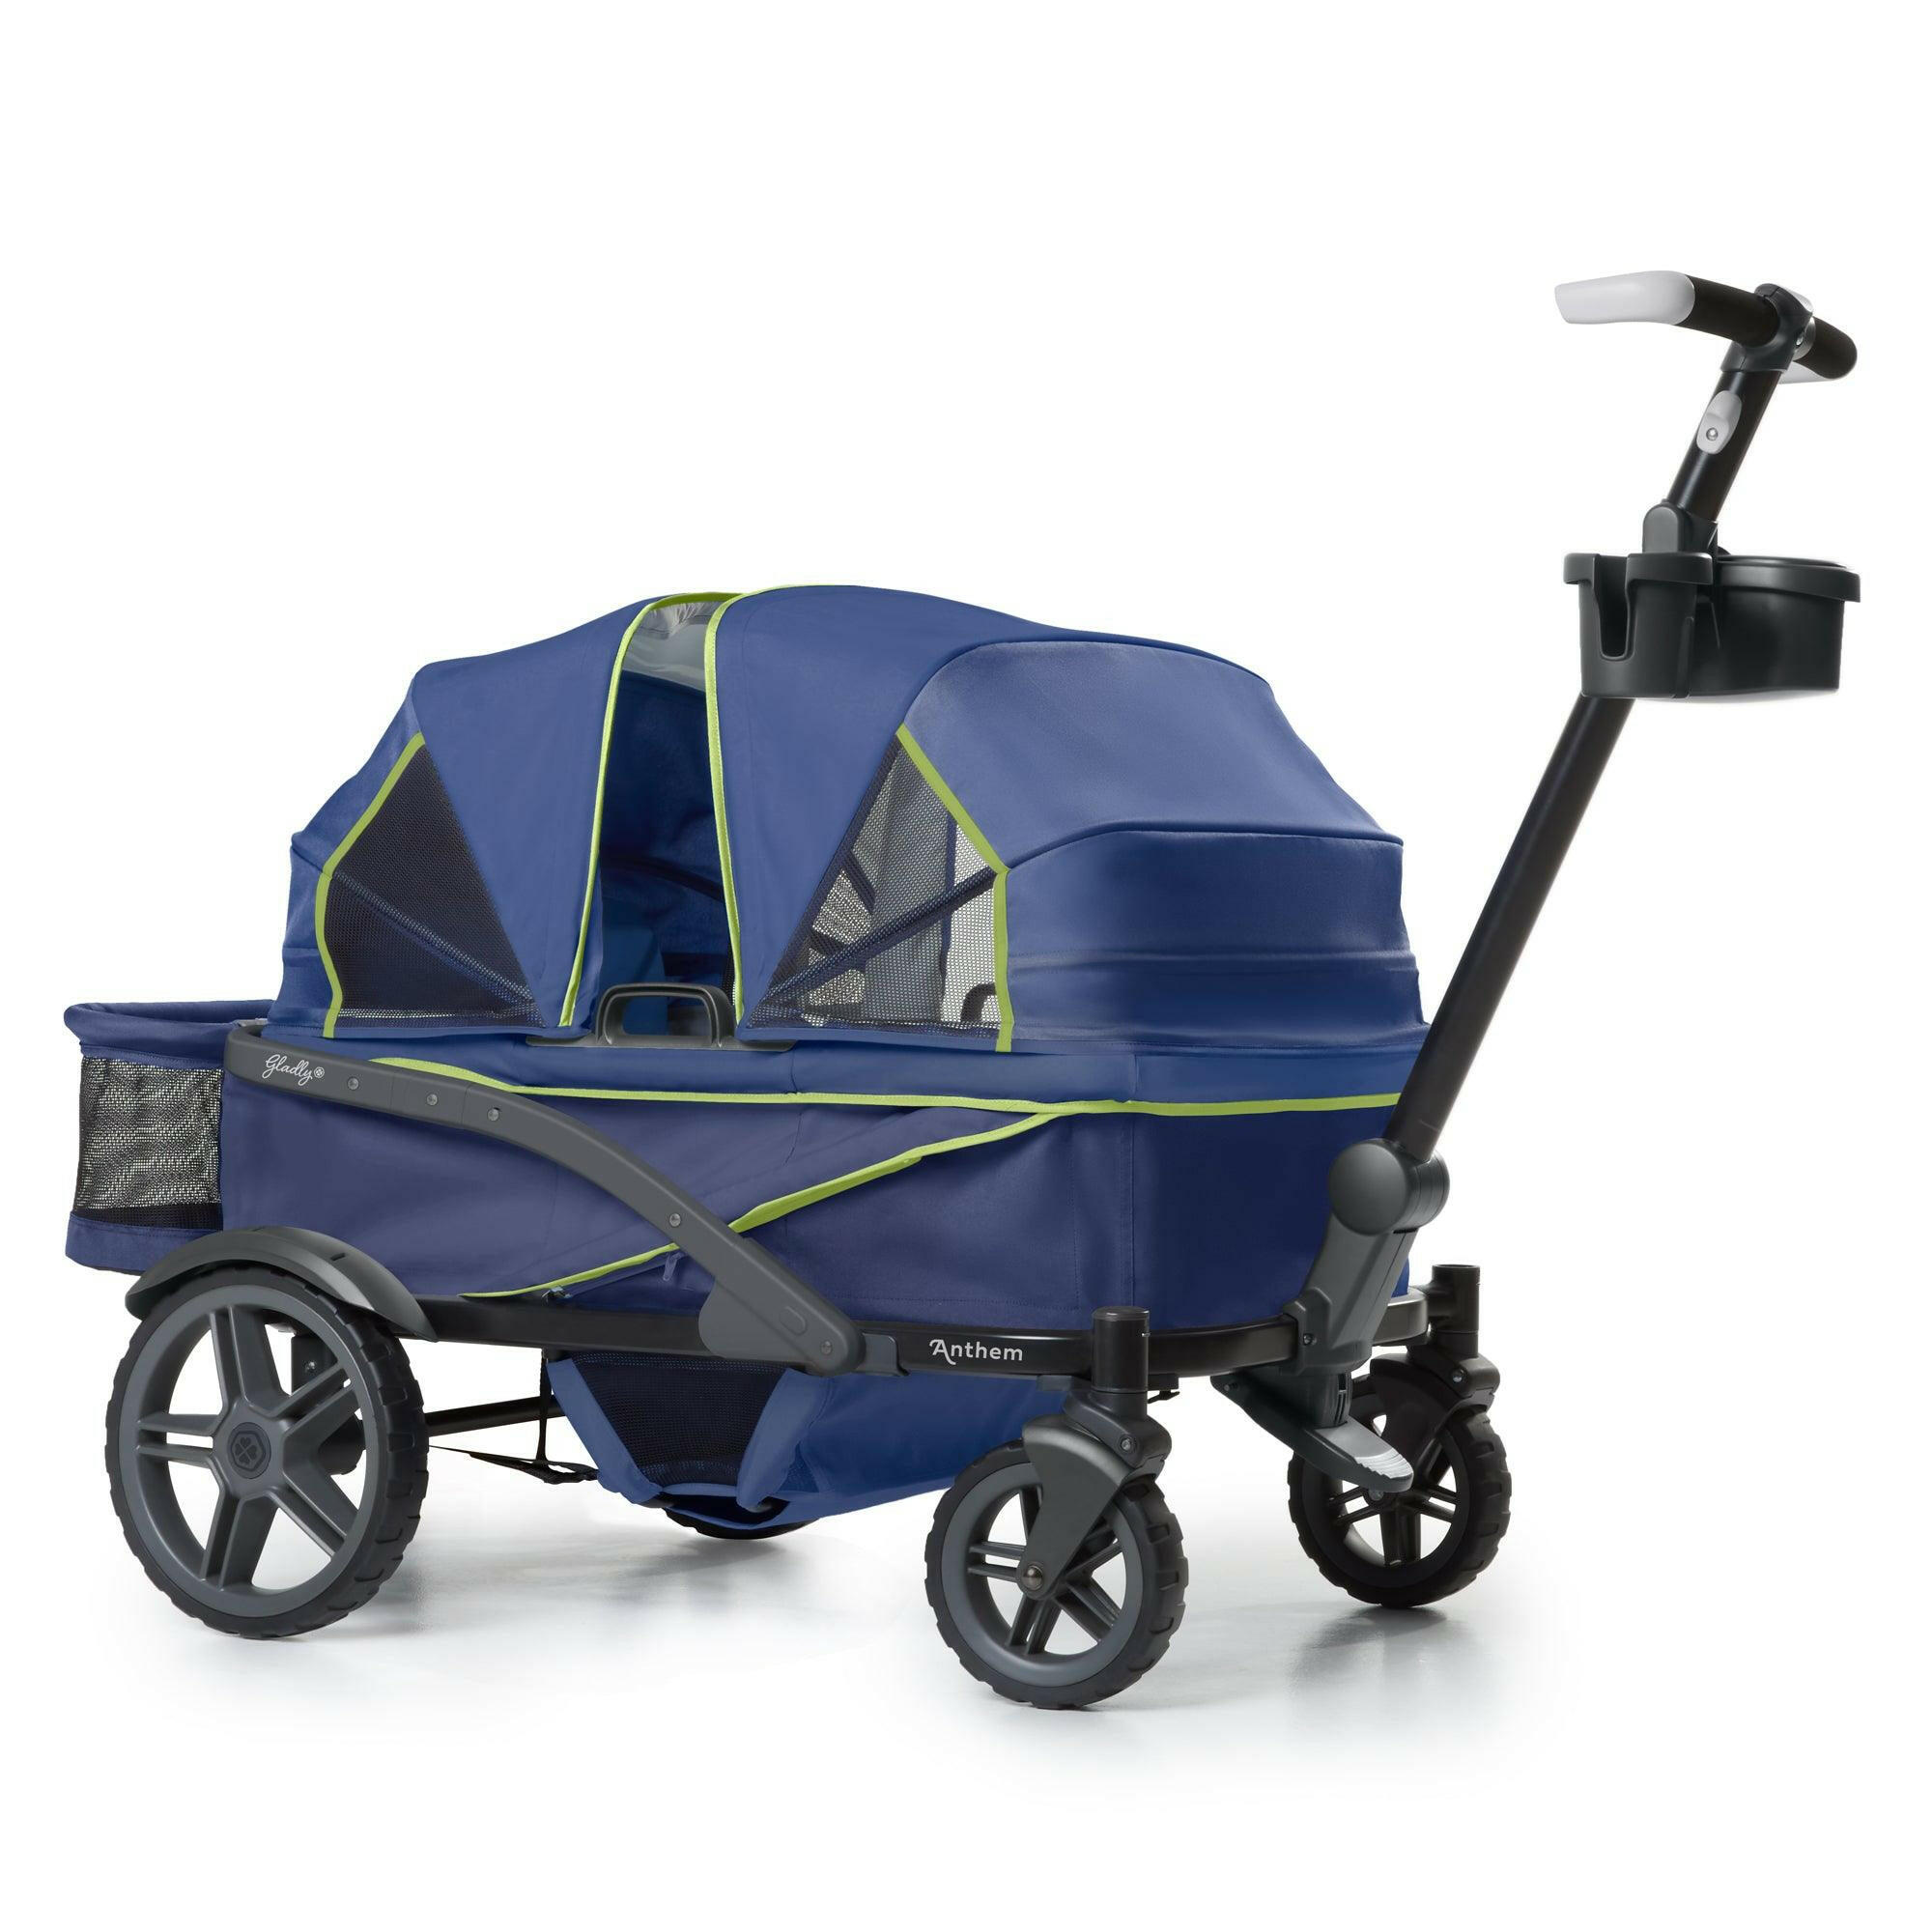 Anthem4™ 4-seater All-Terrain Wagon Stroller – Gladly Family